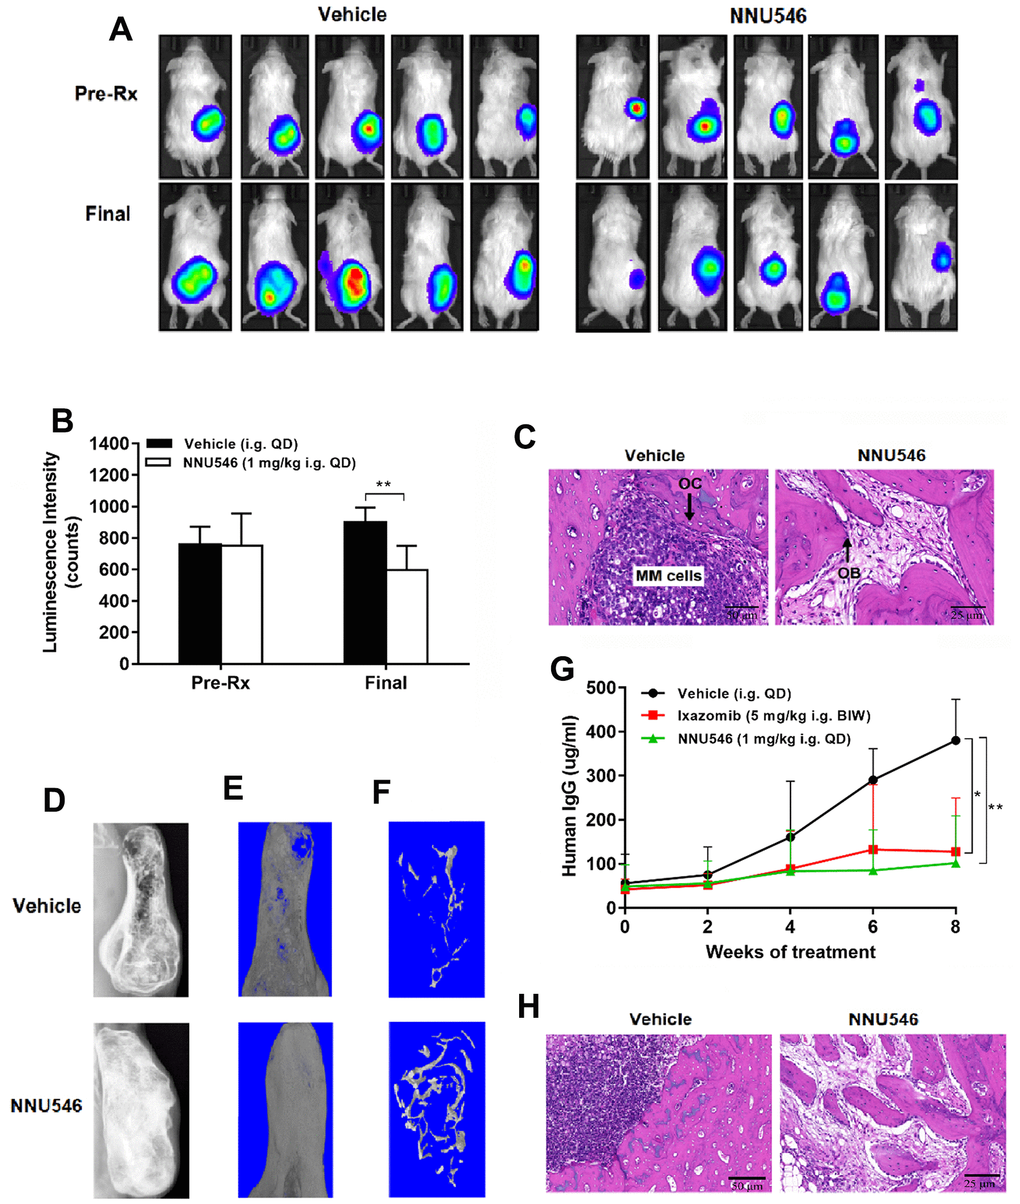 NNU546 inhibits the growth of human MM cells in SCID-rab mouse model. (A) Rabbit bone grafts were subcutaneously implanted into SCID mice. After four weeks, 5×106 of RPMI 8226 cells with luciferase expression were injected directly into the rabbit bone in SCID mice. After establishment of this in vivo model, mice were orally administered with either vehicle or NNU546 (1 mg/kg, QD). Representative imaging of the live animals demonstrated the luciferase expression prior to treatment (Pre-Rx) and at the end of the experiment (Final) in mice. (B) Luminescence intensity was quantified using living animal imaging of mice prior to treatment (Pre-Rx) and at the end of the experiment (Final). Data were expressed as mean ± SD (n=5; **, p C) H&E staining of histological sections of myelomatous bones engrafted with myeloma cells (×200 or ×400 original magnification). Increased myeloma cell infiltration and osteoclast activity were noted in control group. In contrast, myelomatous bone from a host treated with NNU546 had no apparent myeloma cells but possessed increased number of trabecular bone and osteoblast. (D) SCID-rab mice engrafted with myeloma cells from MM patients were treated with vehicle, ixazomib (5 mg/kg, BIW) or NNU546 (1 mg/kg, QD). X-radiographs of myelomatous bones engrafted with myeloma cells from MM patients were performed at the end of the experiment. (E, F) Representative microCT images of bone grafts excised from vehicle-treated animals and mice that had received NNU546 for 8 weeks. (G) Effect of therapy on myeloma growth assessed by human IgG levels in the mouse serum measured by ELISA. Data were shown as mean ± SD (n=5; *, p p H) H&E staining of histological sections of myelomatous bones engrafted with cells from MM patients (original magnification, ×200 or ×400 original magnification).